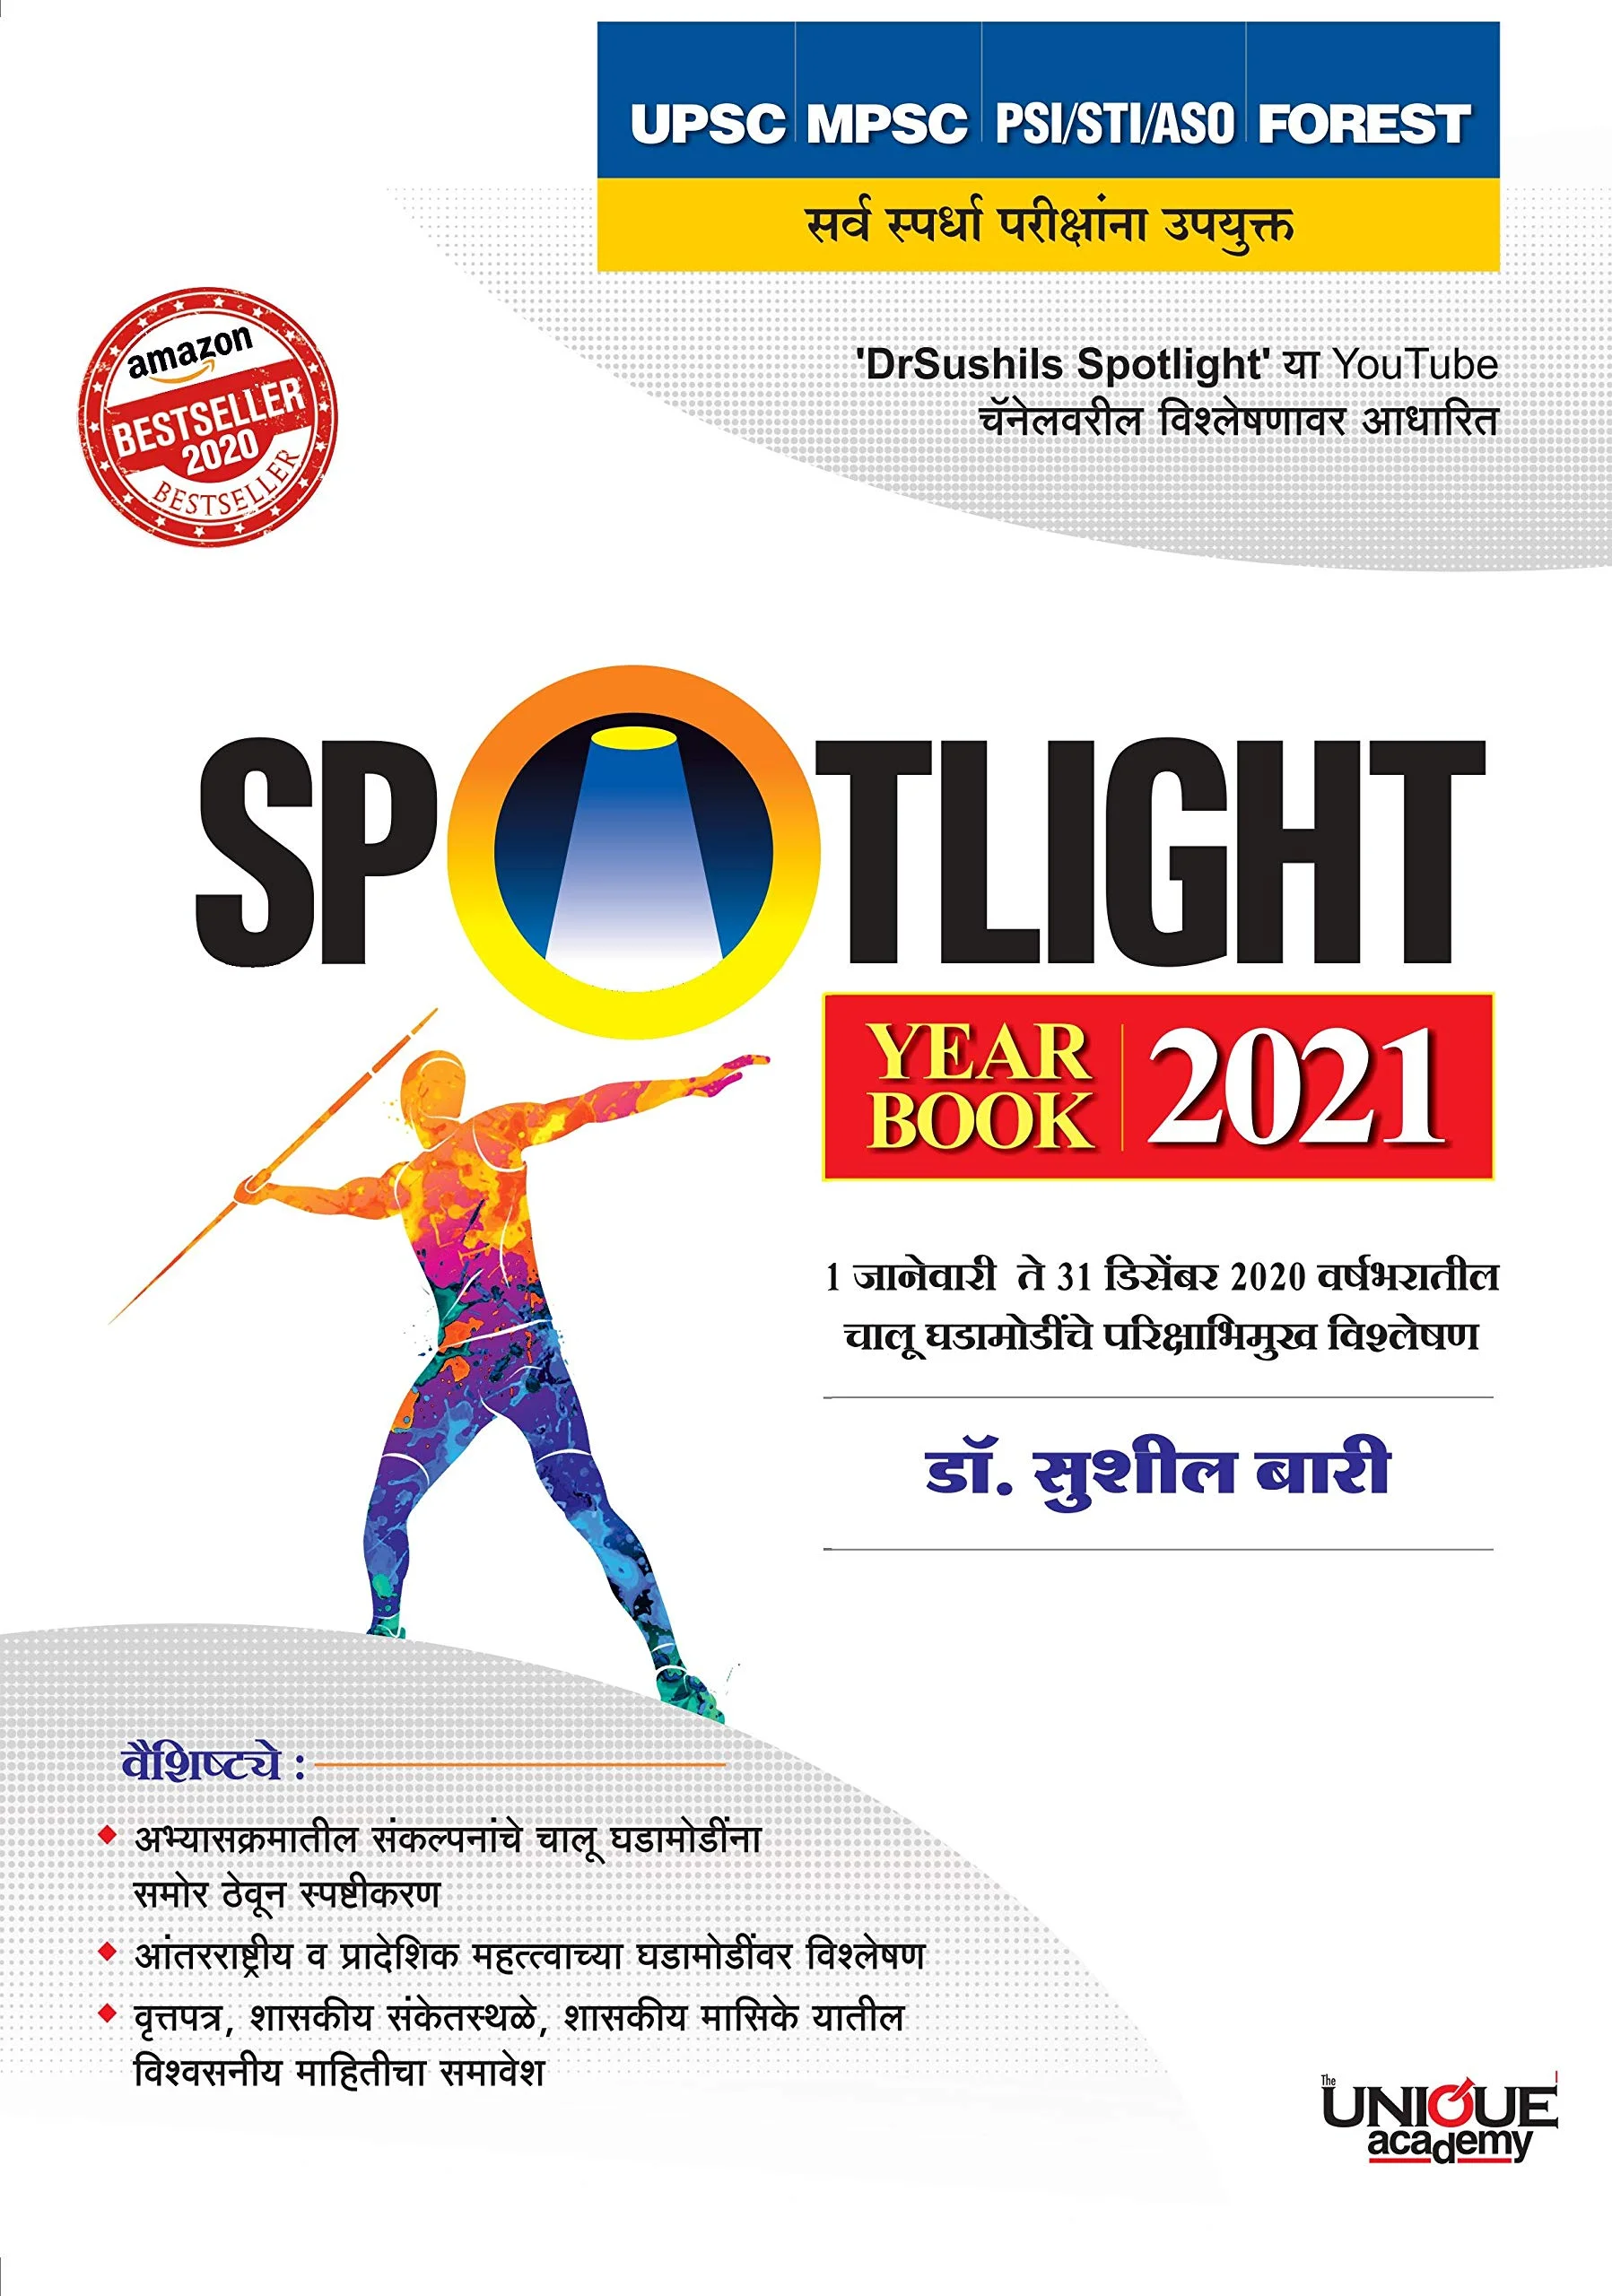 SPOTLIGHT YEAR BOOK-2021 / CURRENT AFFAIRS YEAR BOOK 2021